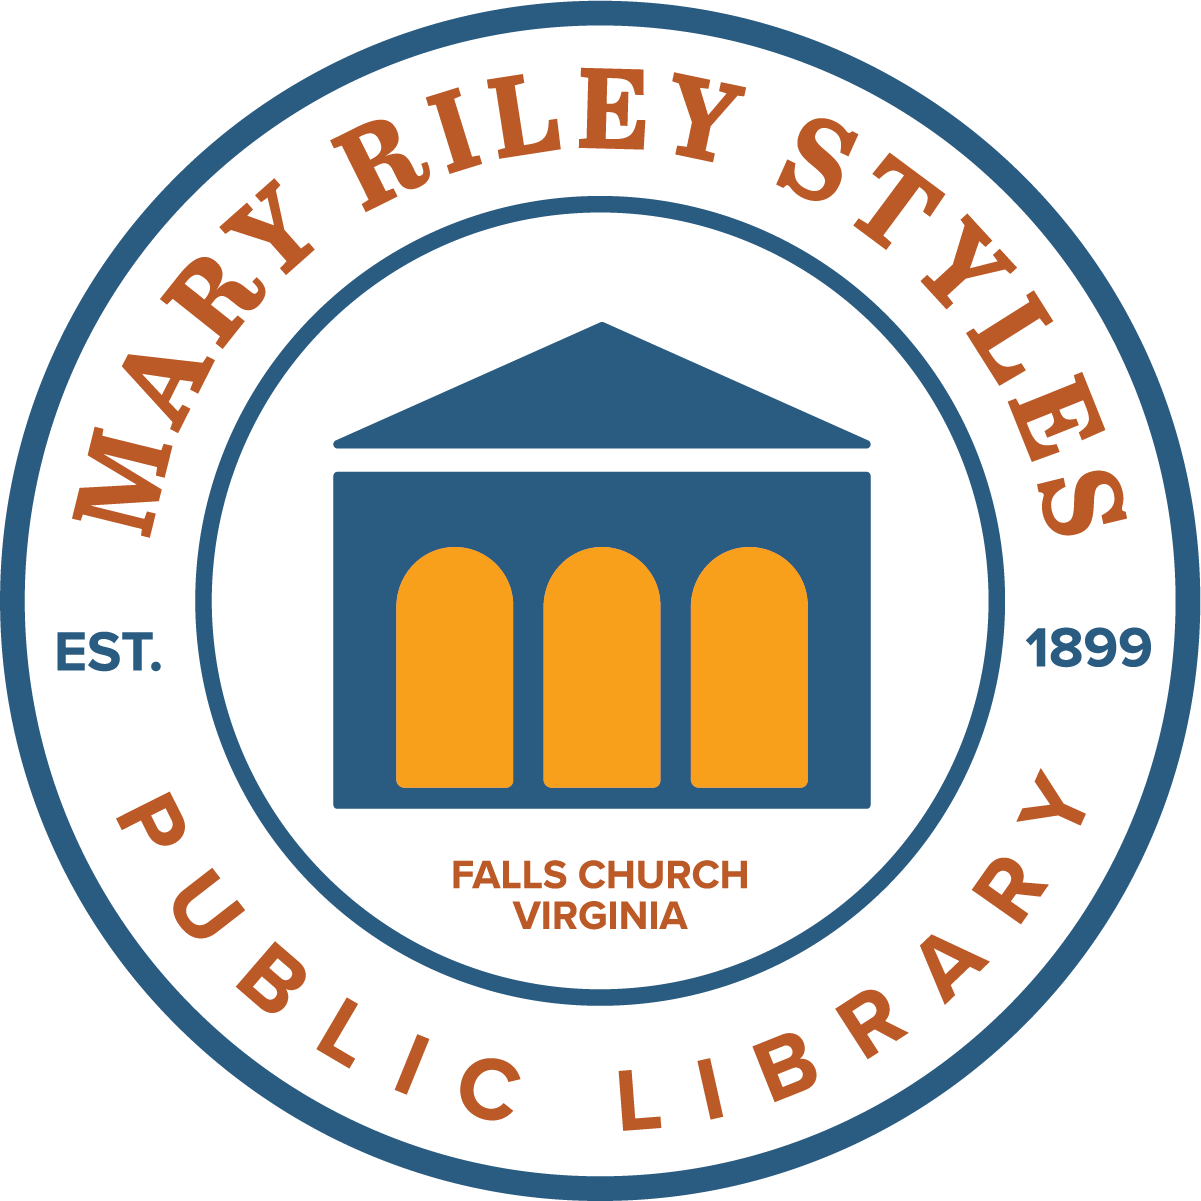 Mary Riley Styles Pubic Library logo